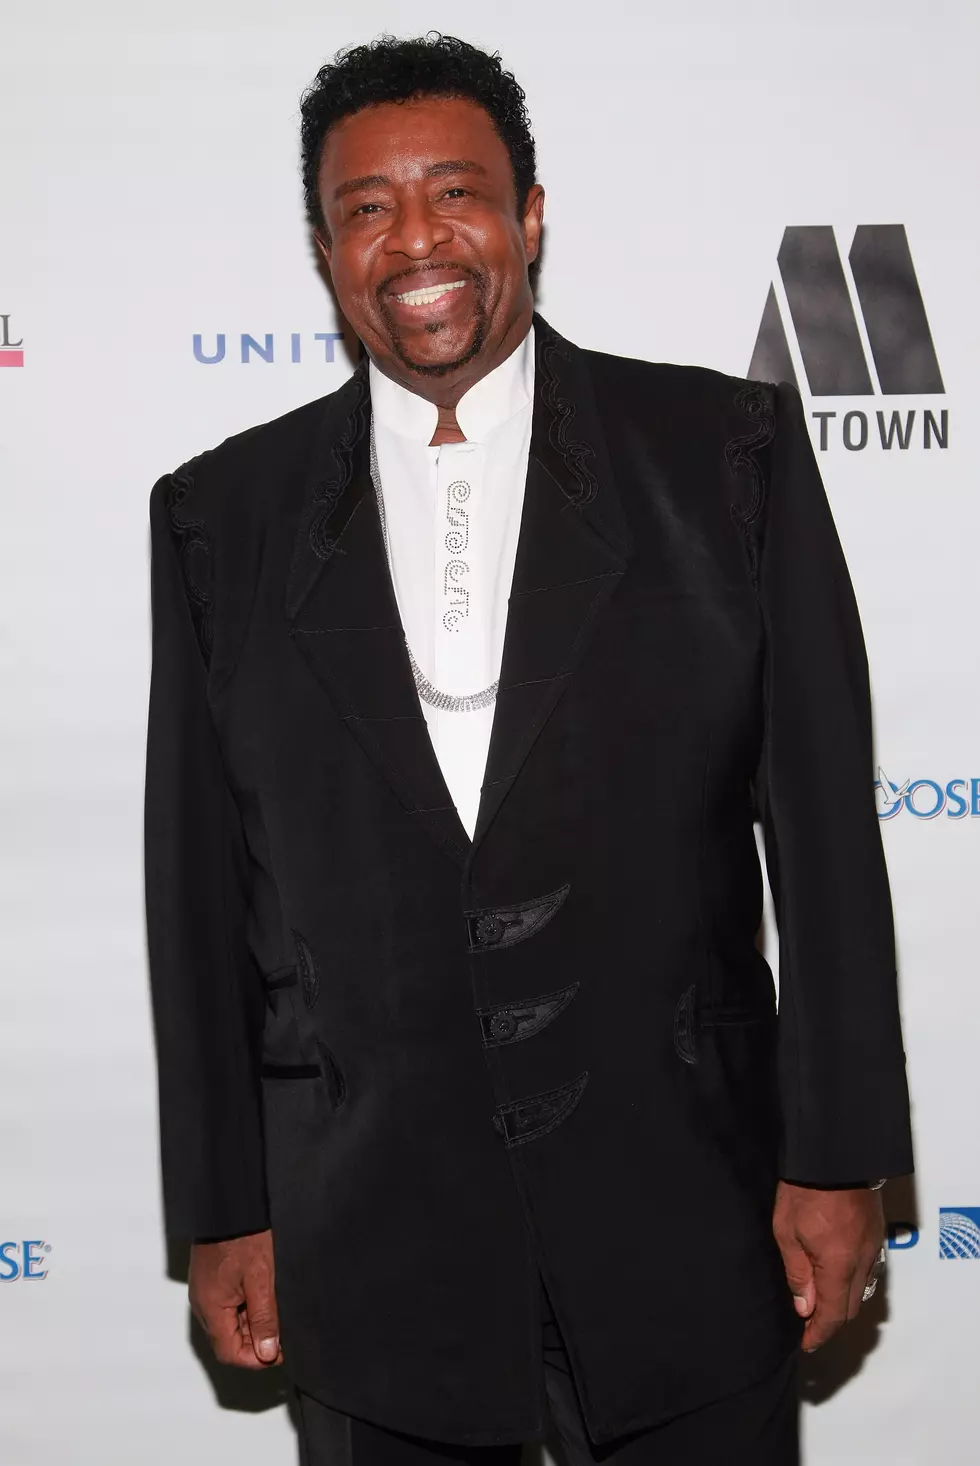 February 3rd in Black Music History &#8212; Temptations Singer Was Born in Alabama